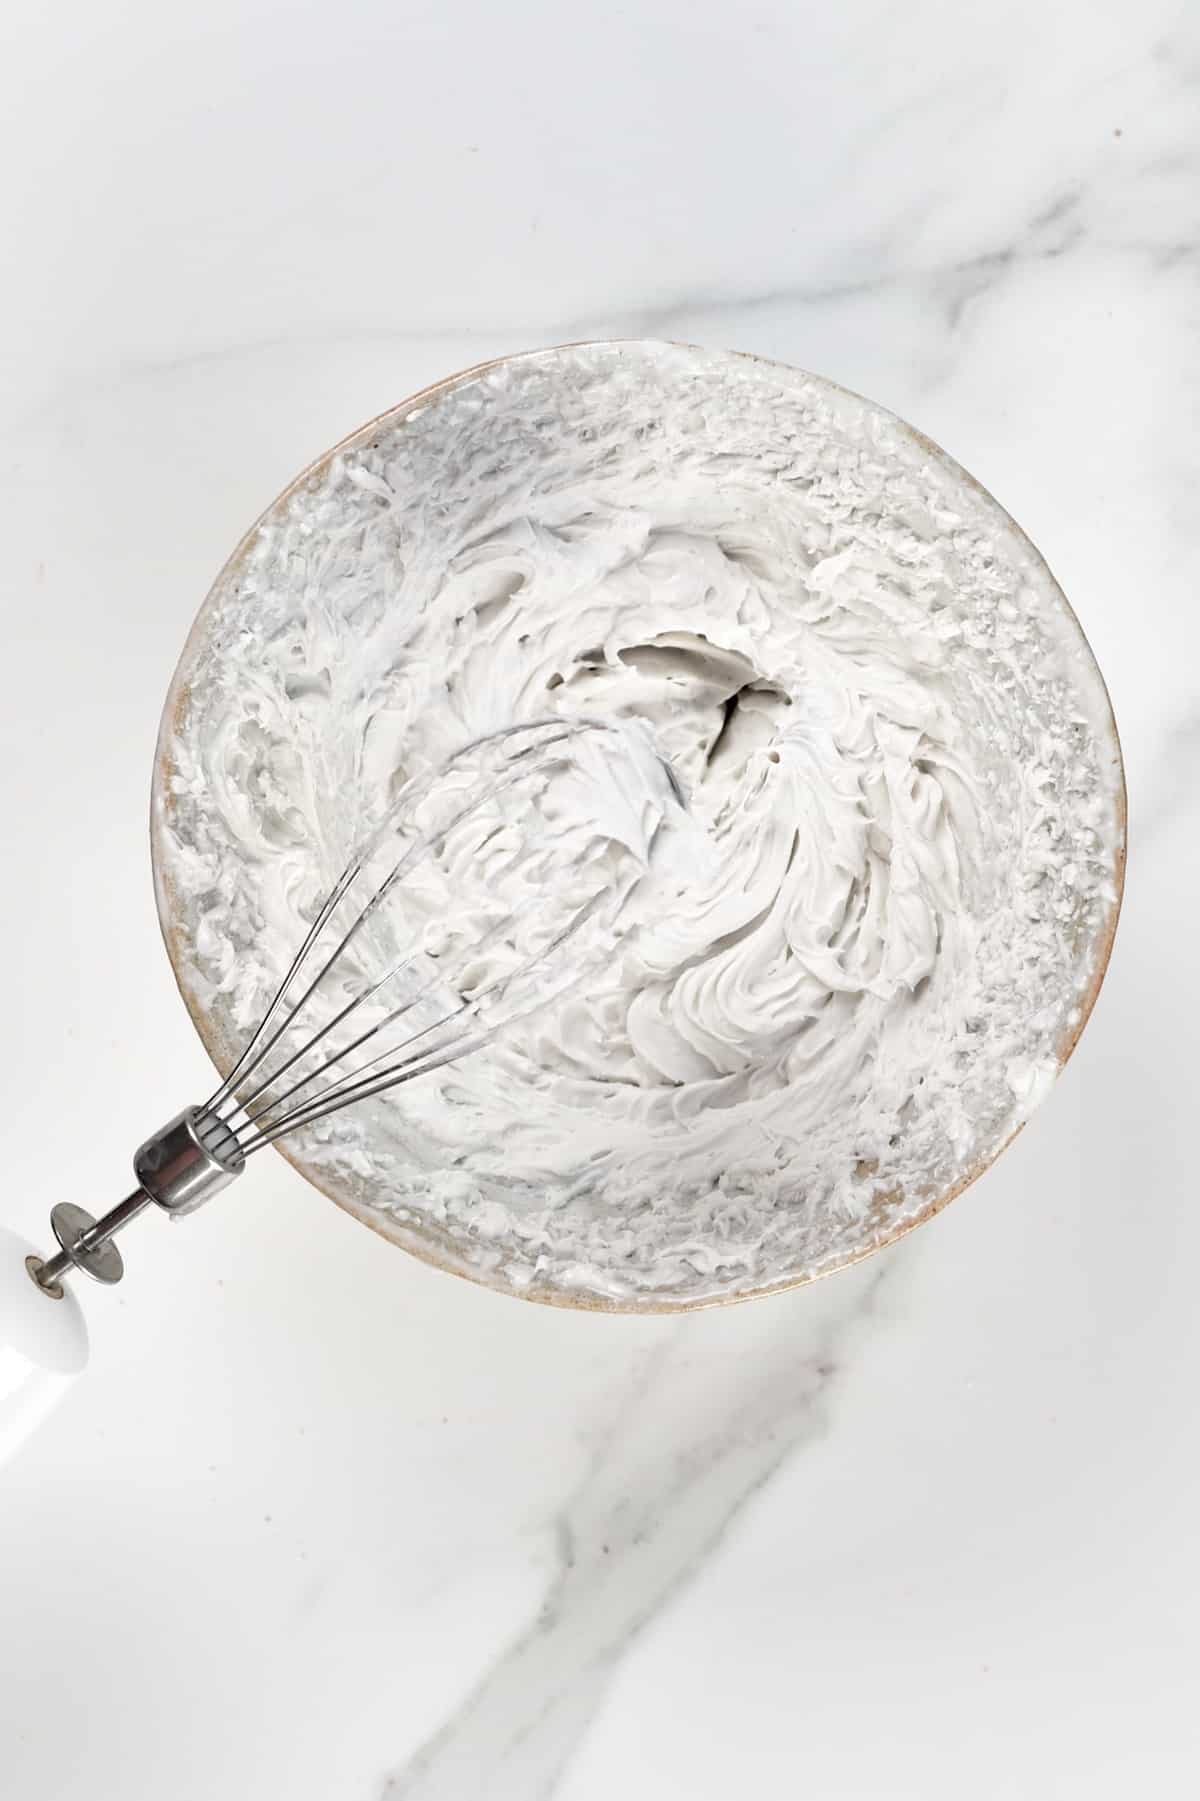 Whipping coconut cream in a bowl